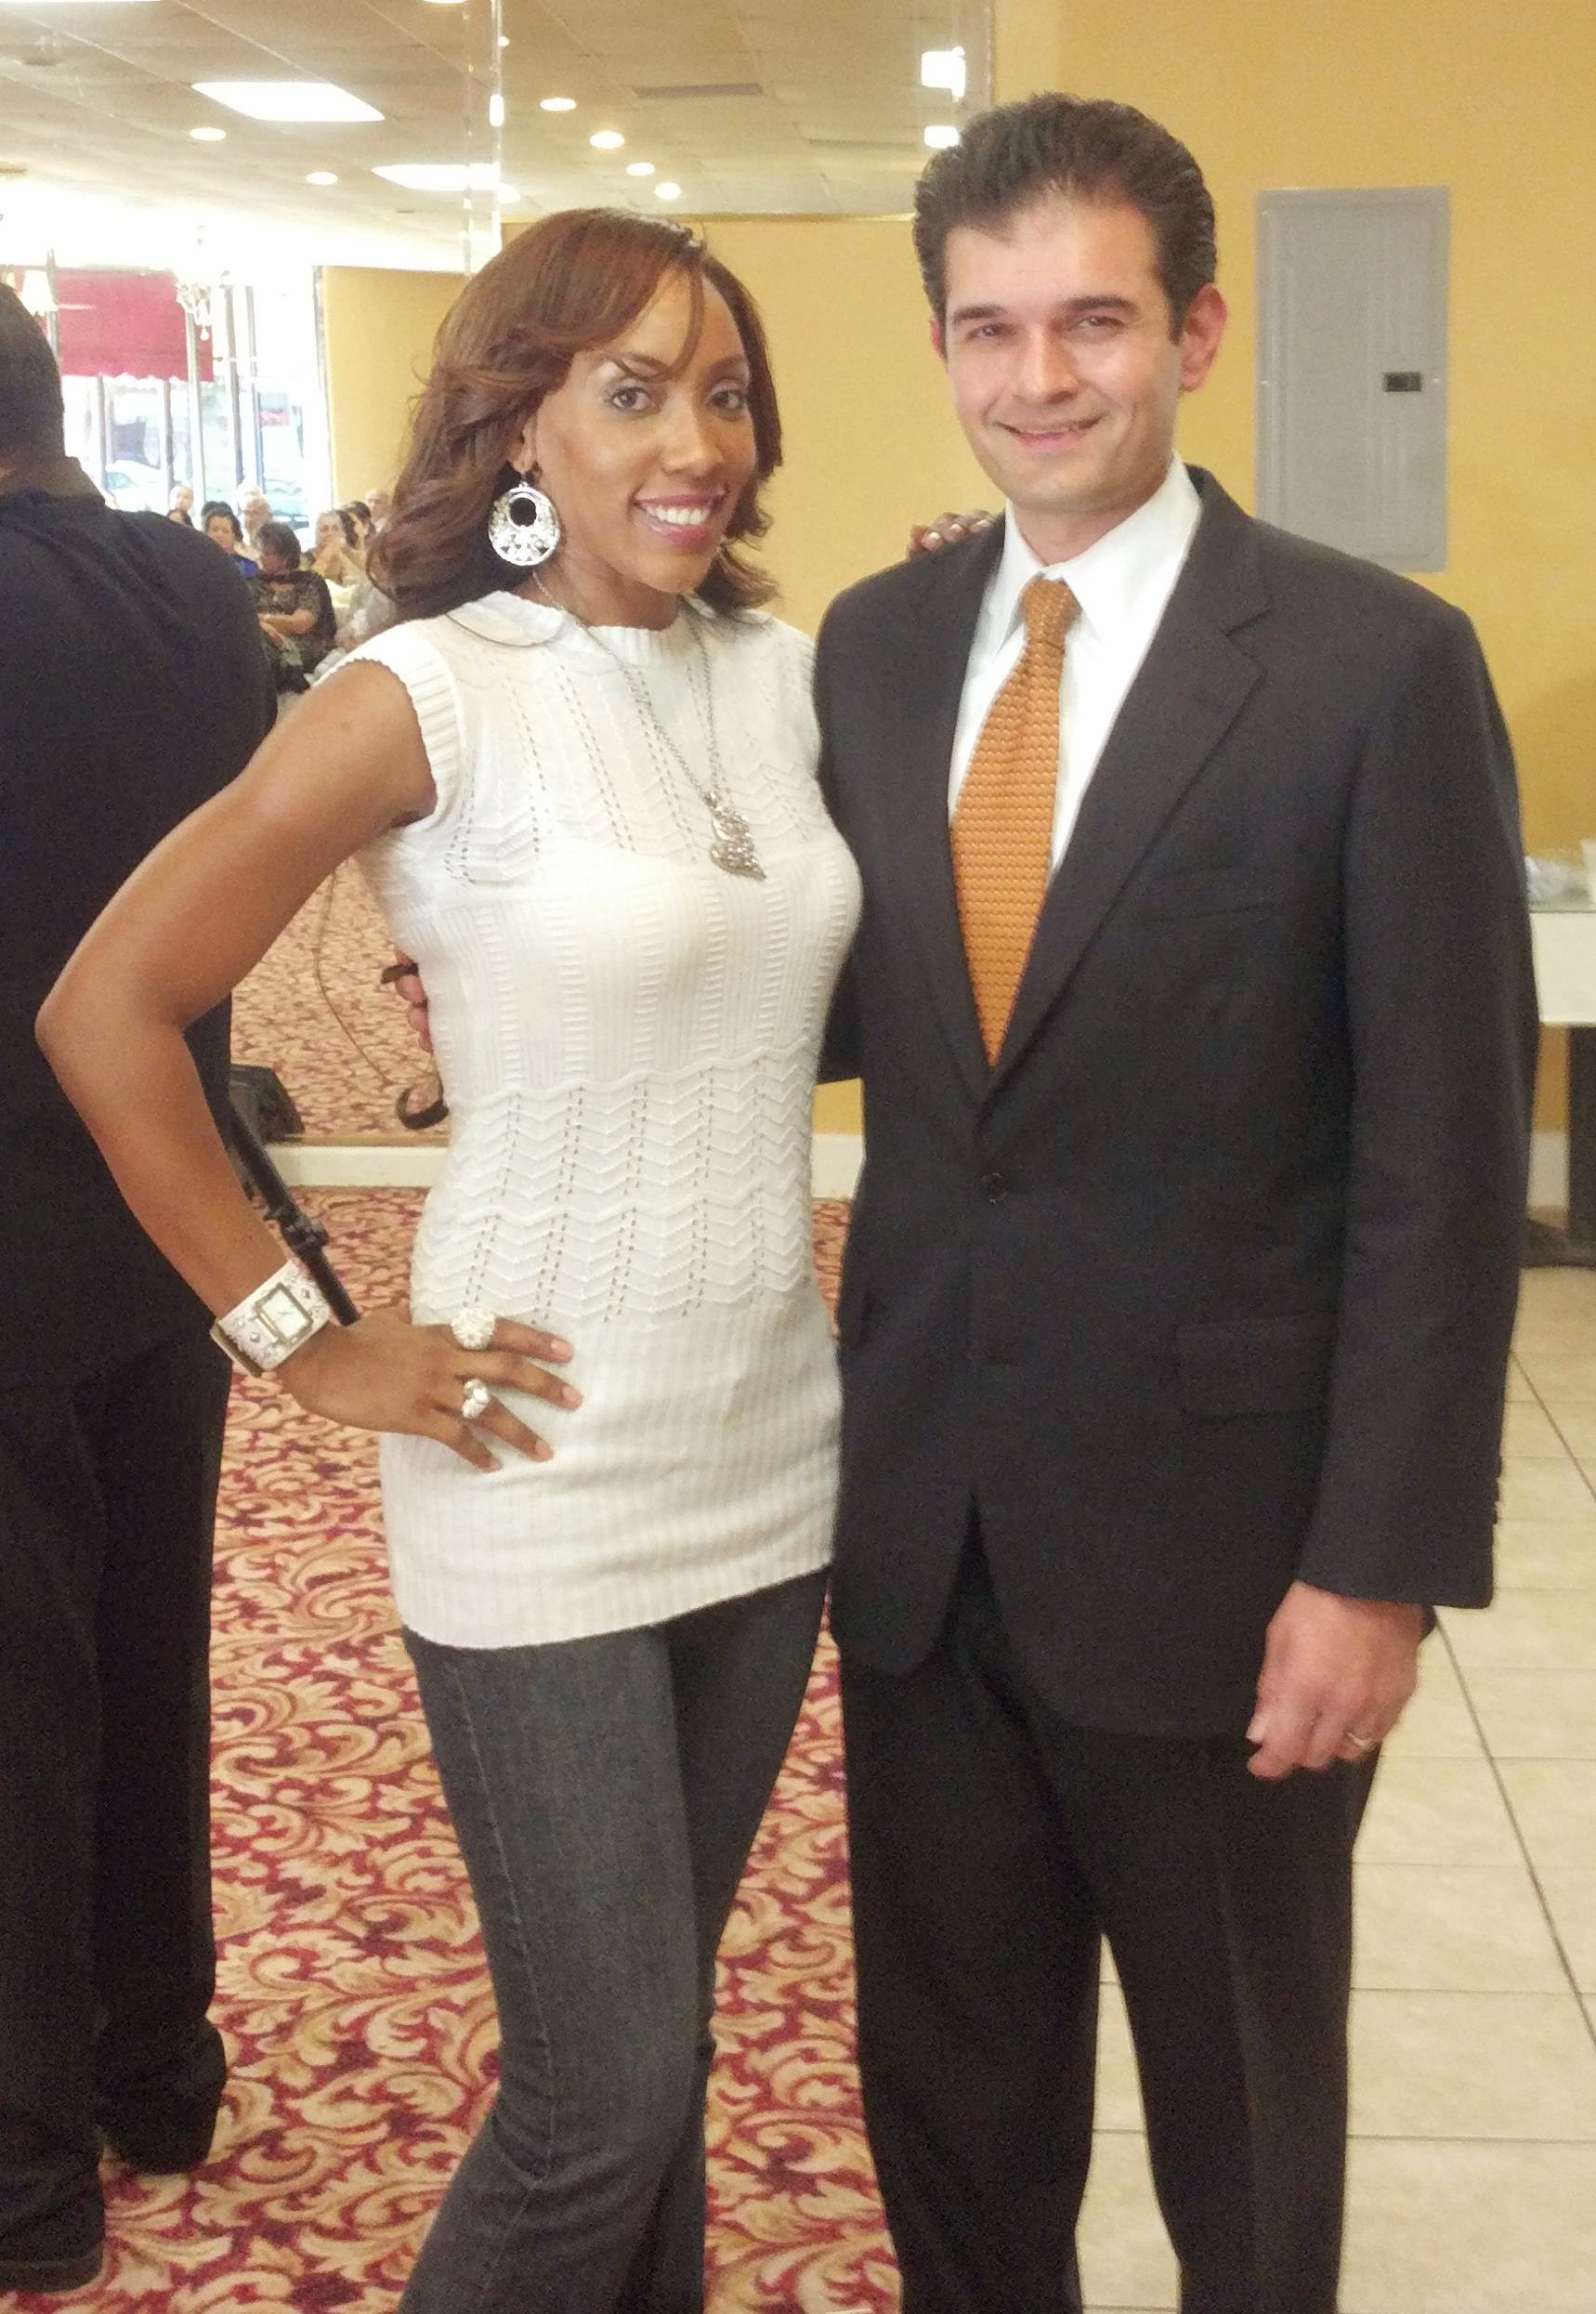 Yusef Robb Deputy Chief of Staff for Council man Eric Garcetti District 13 and I at India Luncheon!